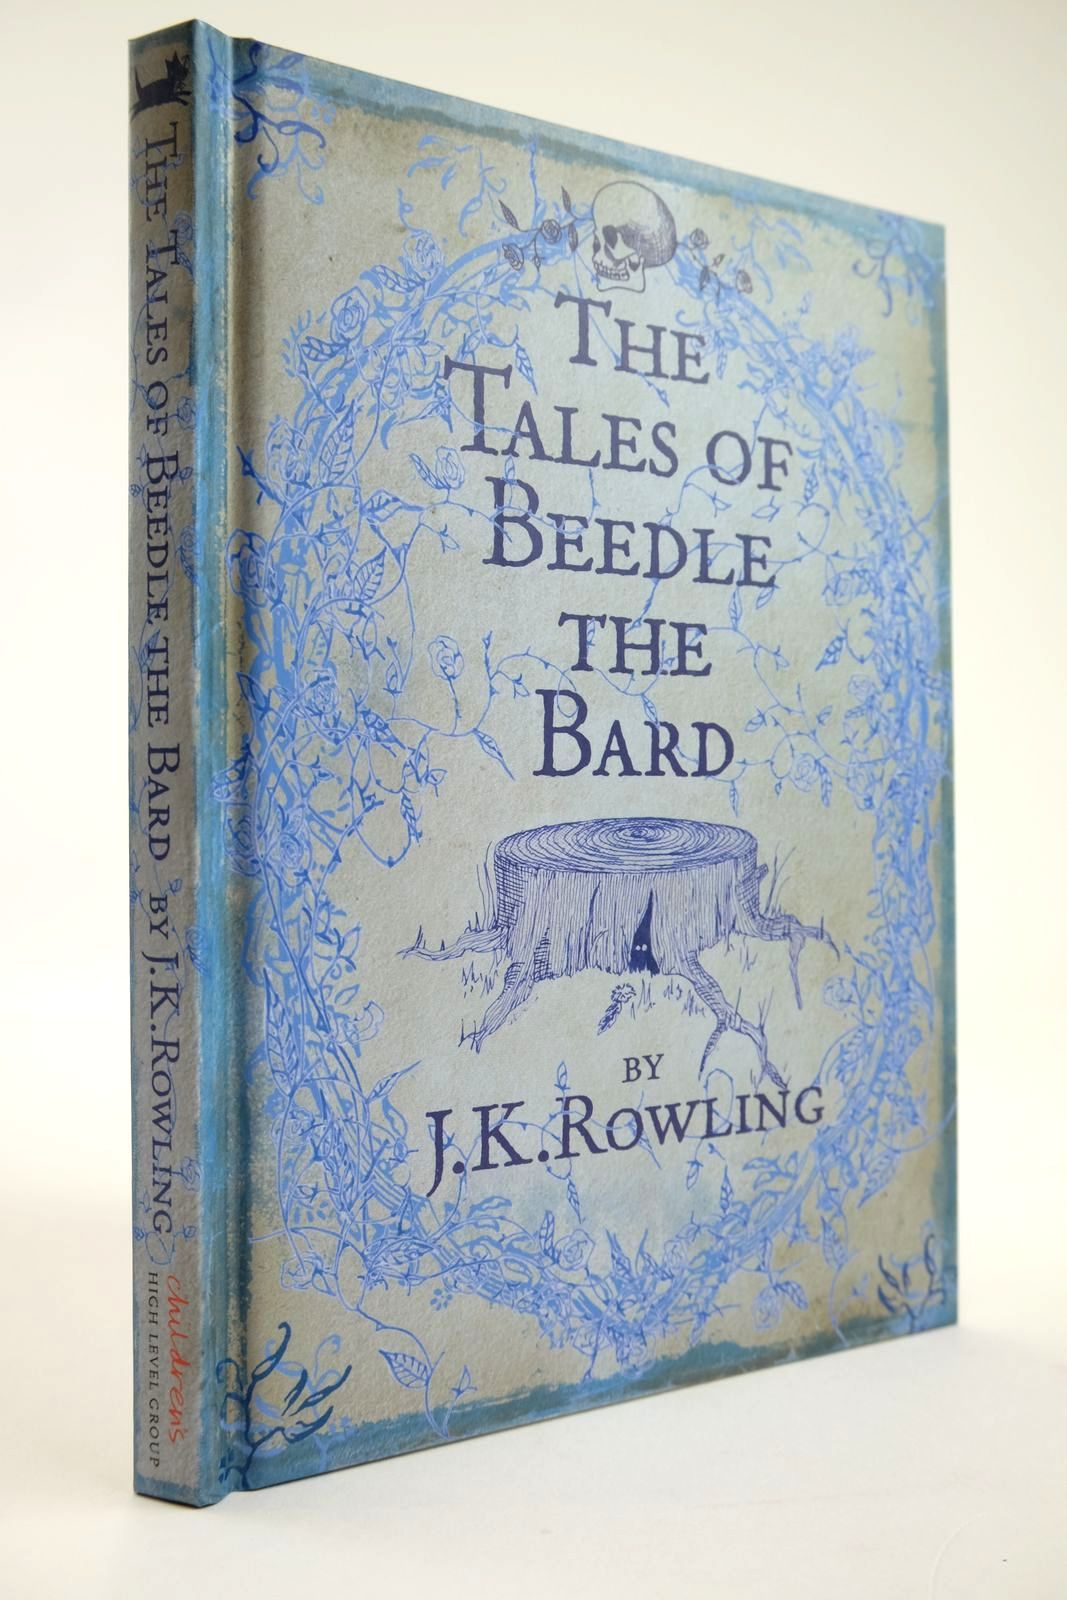 Photo of THE TALES OF BEEDLE THE BARD written by Rowling, J.K. illustrated by Rowling, J.K. published by The Children's High Level Group, Bloomsbury (STOCK CODE: 2133537)  for sale by Stella & Rose's Books